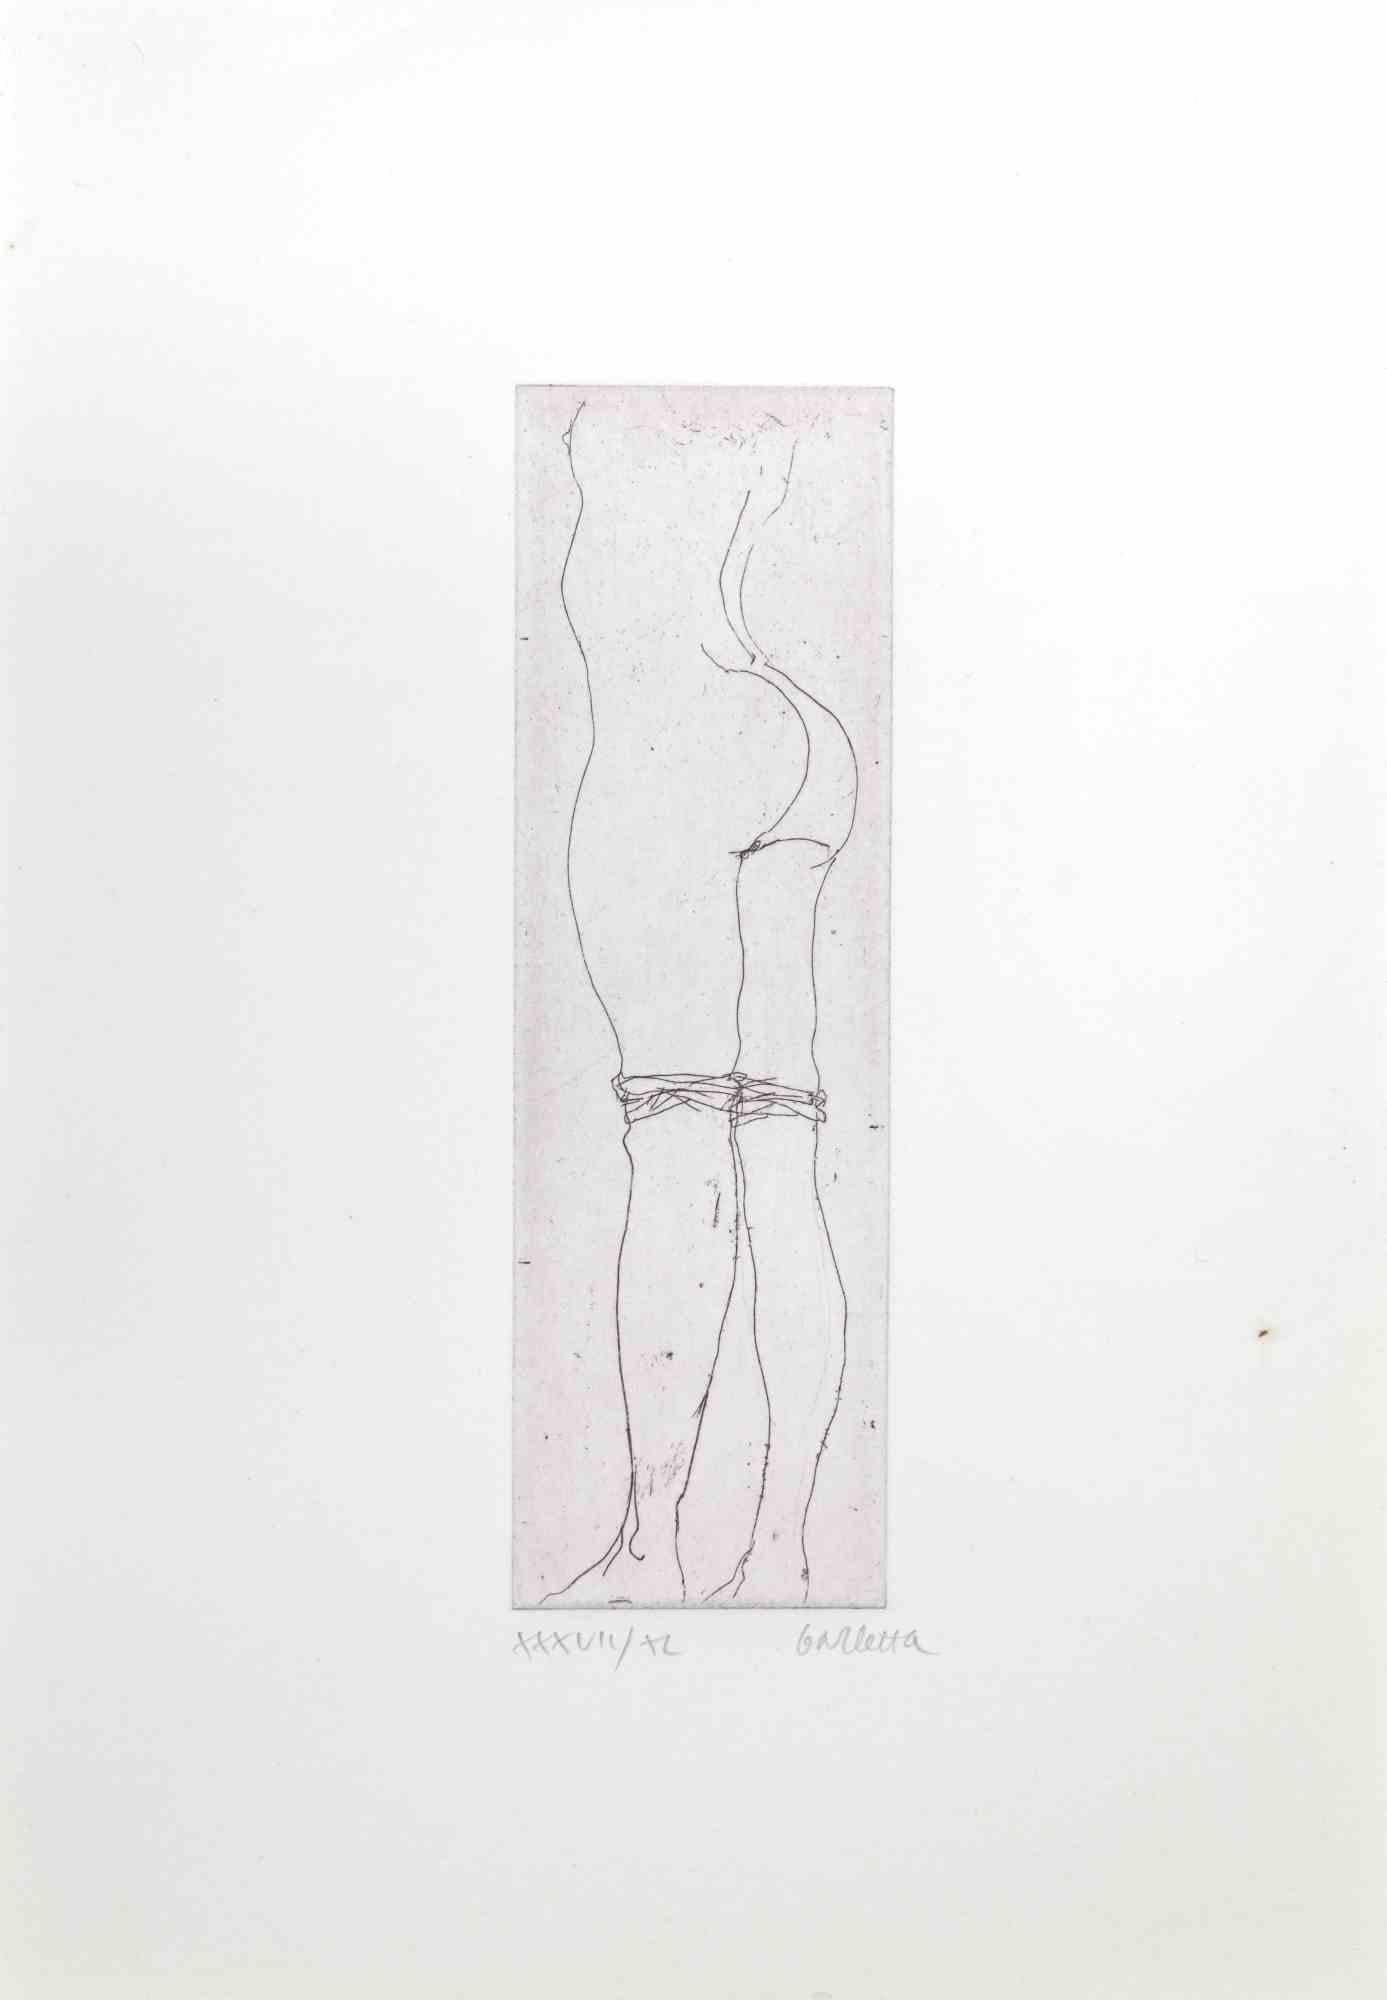 Nude is aetching realized by Sergio Barletta in 1974. 

Sheet dimensions, 25 x 17 cm.

Handsigned in pencil in the lower right margin.

Edition XXXVII/XL. 

Good condtions. 